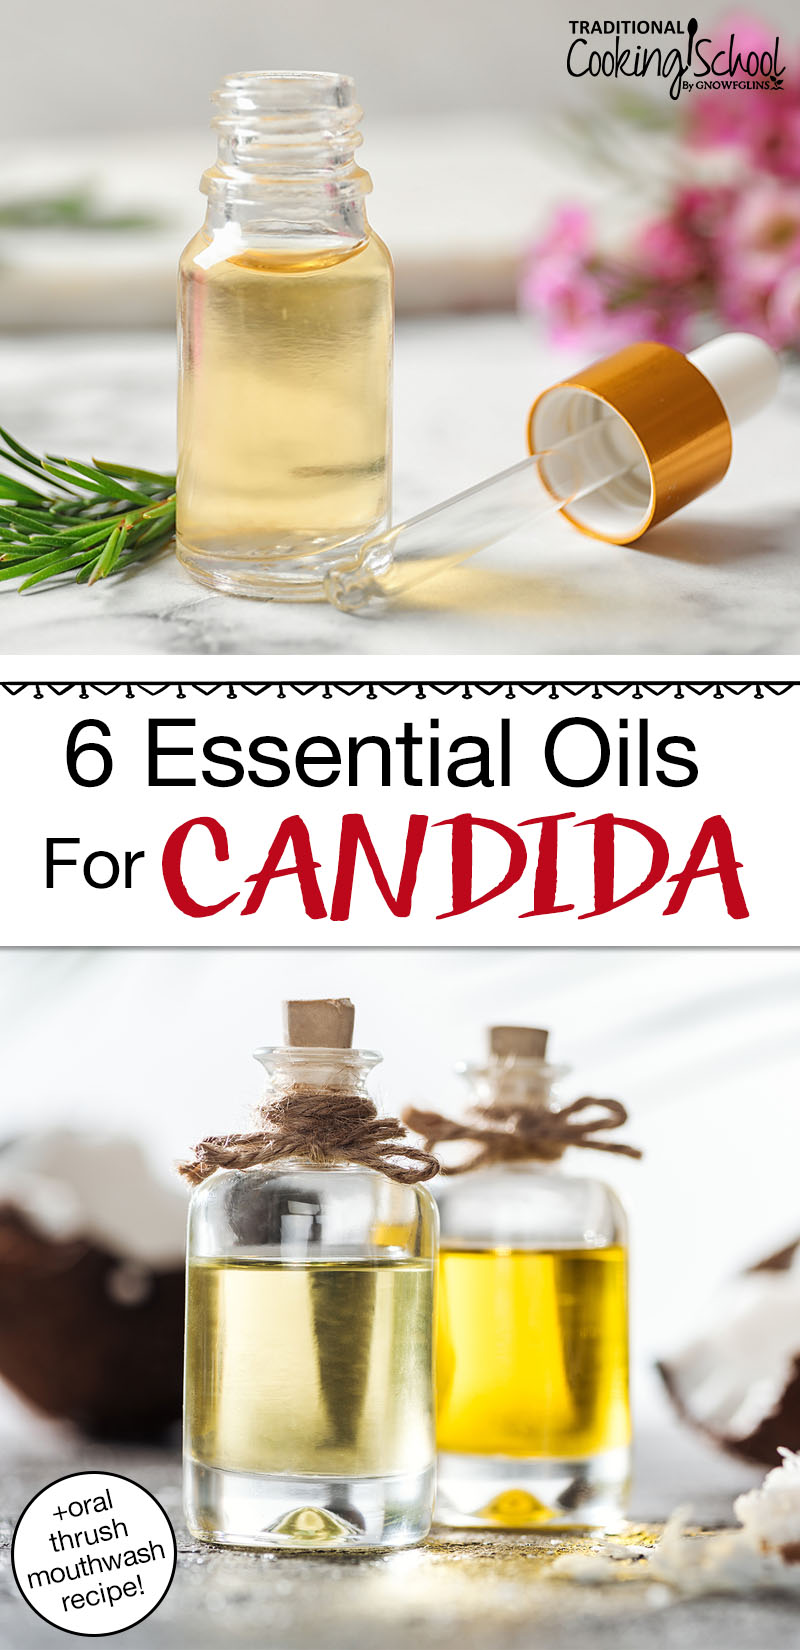 Photo collage of various small bottles of essential oils. Text overlay says: "6 Essential Oils For Candida (+ oral thrush mouthwash recipe!)"